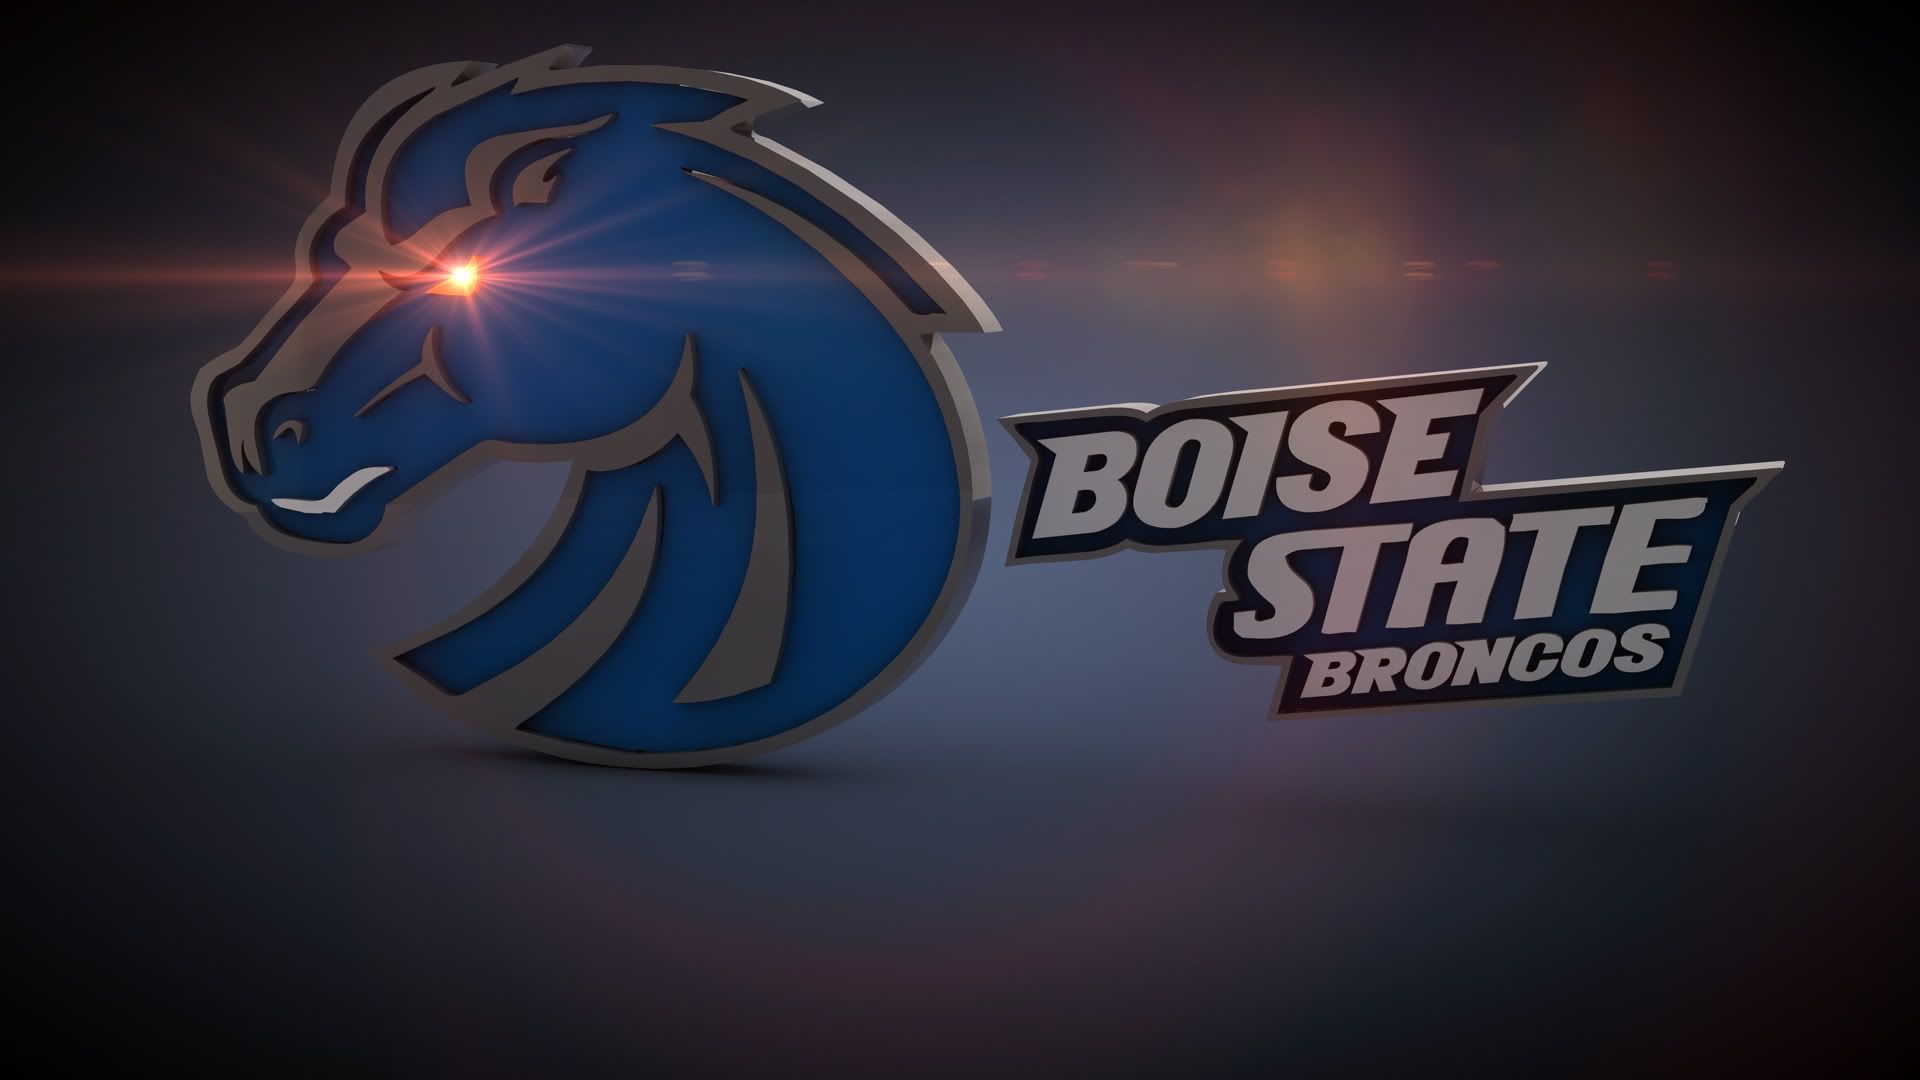 Boise State Broncos Wallpapers | BestSportsWallpapers.com